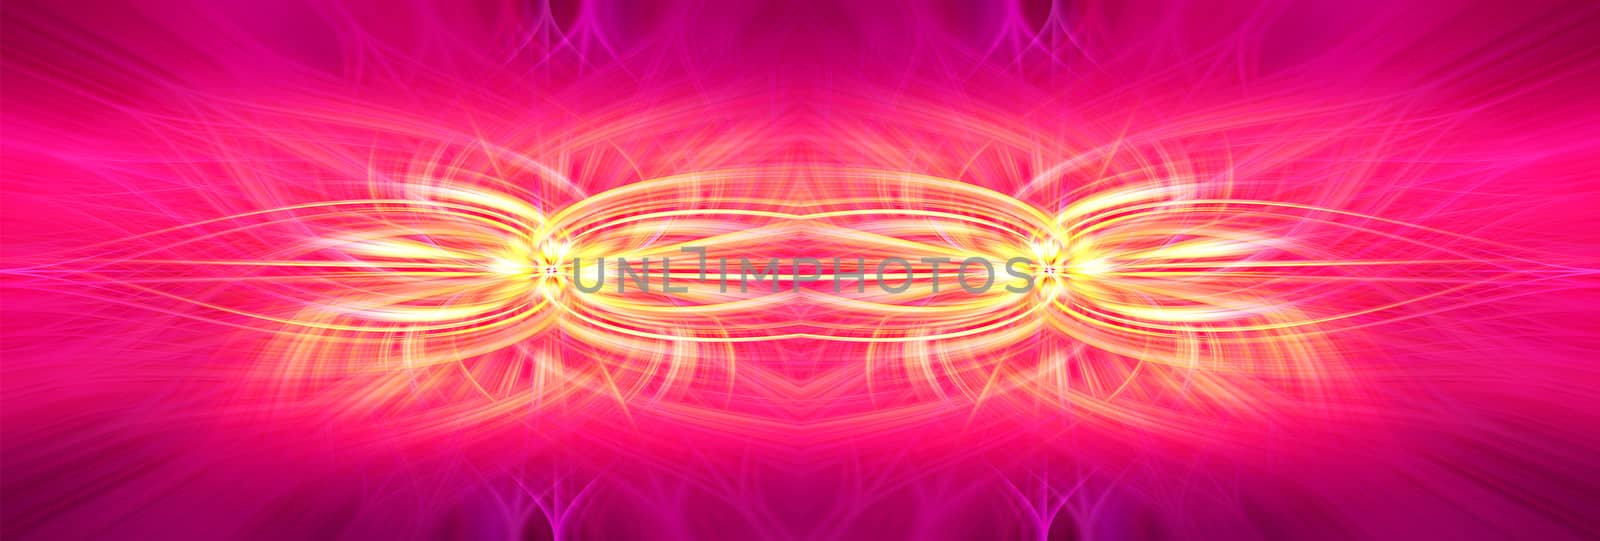 Beautiful abstract intertwined symmetrical 3d fibers forming a shape of sparkle, flame, flower, interlinked hearts. Pink, maroon, yellow, and purple colors. Illustration. Banner and panorama size